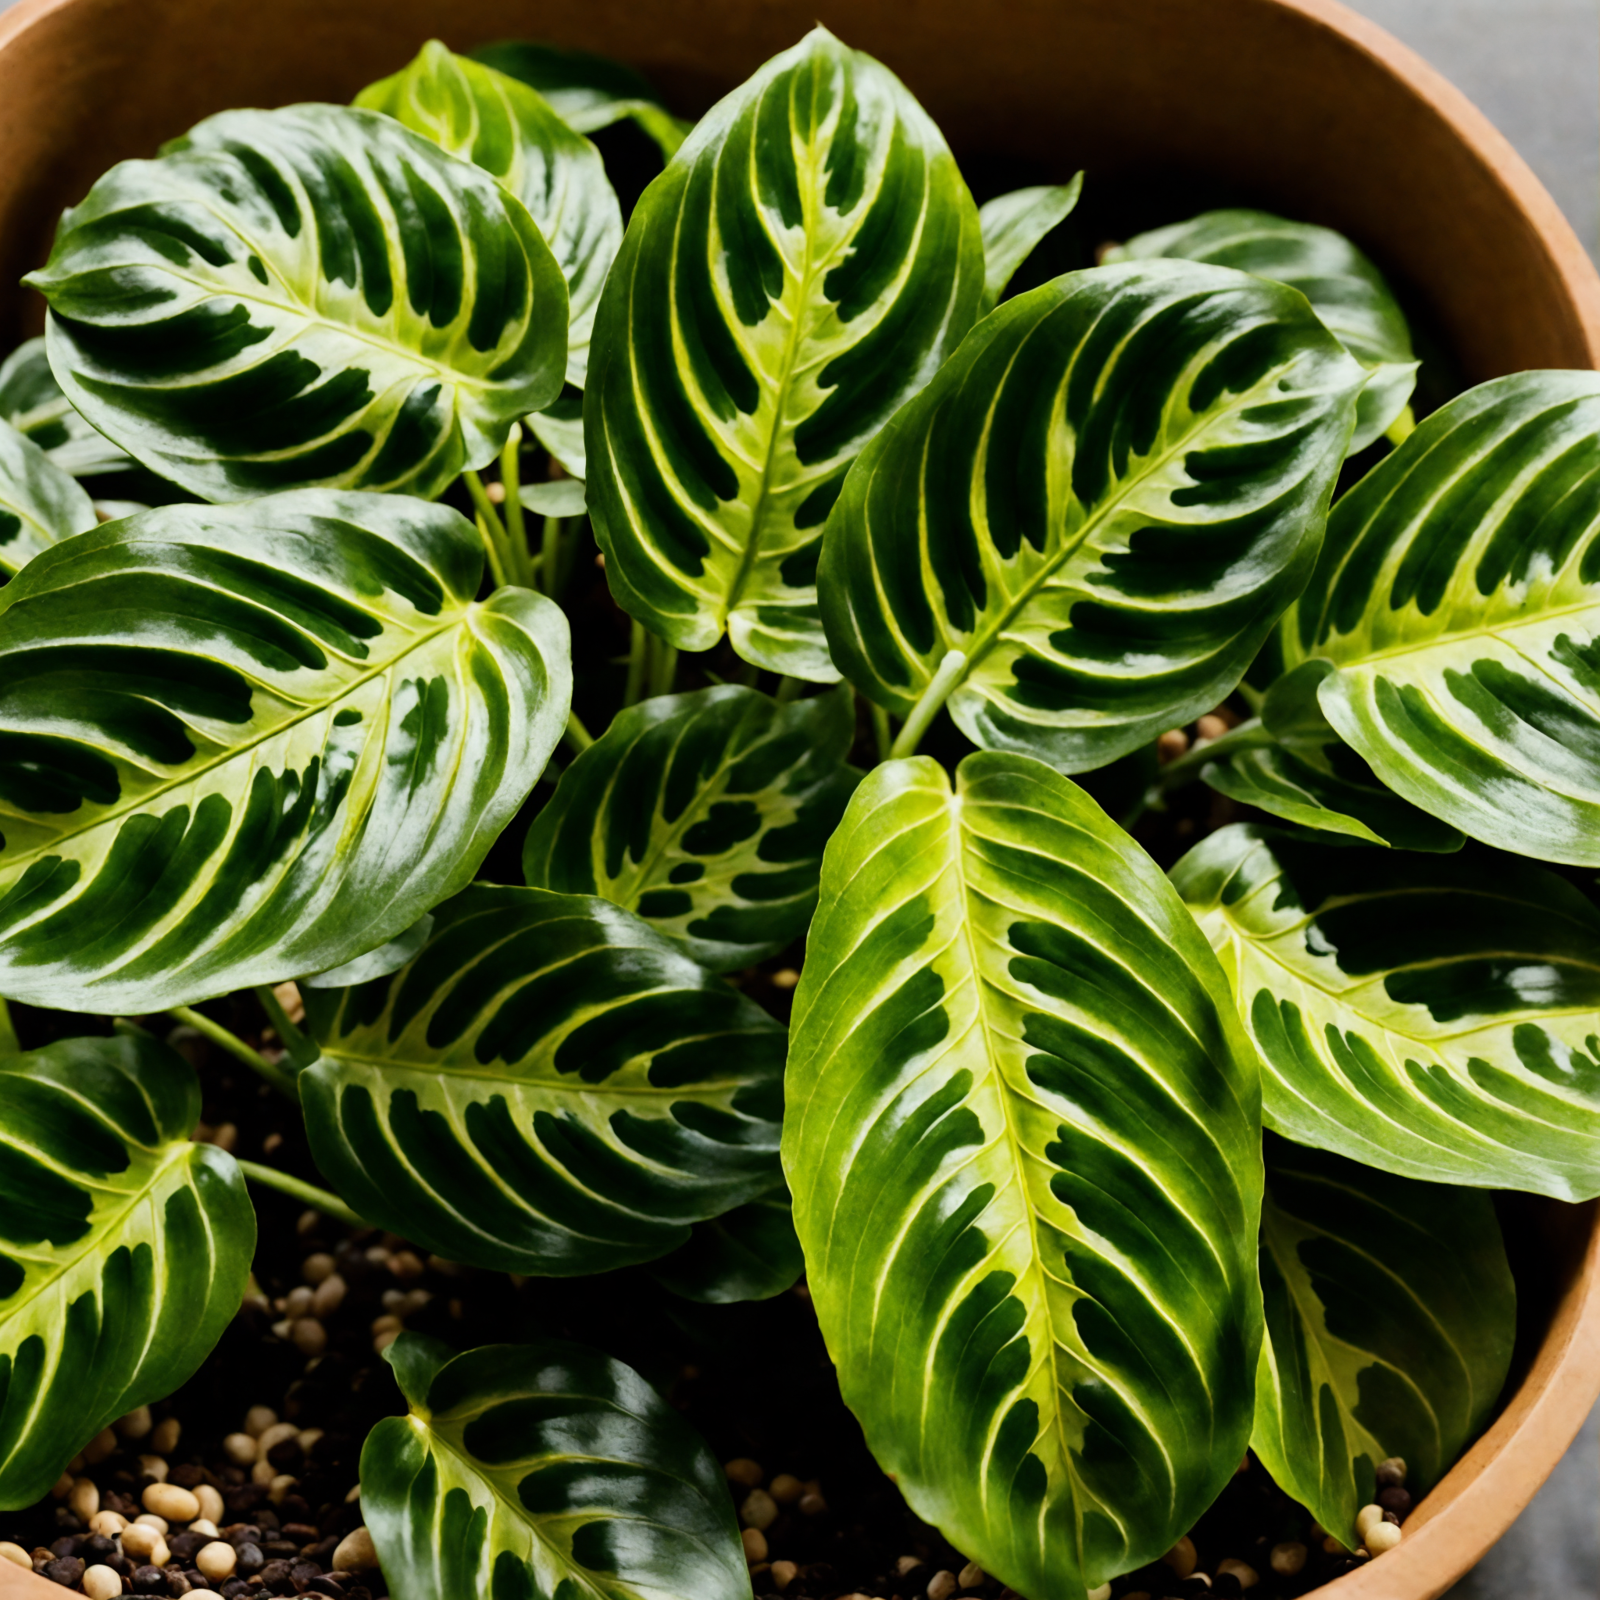 Maranta leuconeura, also known as prayer plant, with vibrant green leaves, in a bowl planter against a dark background.